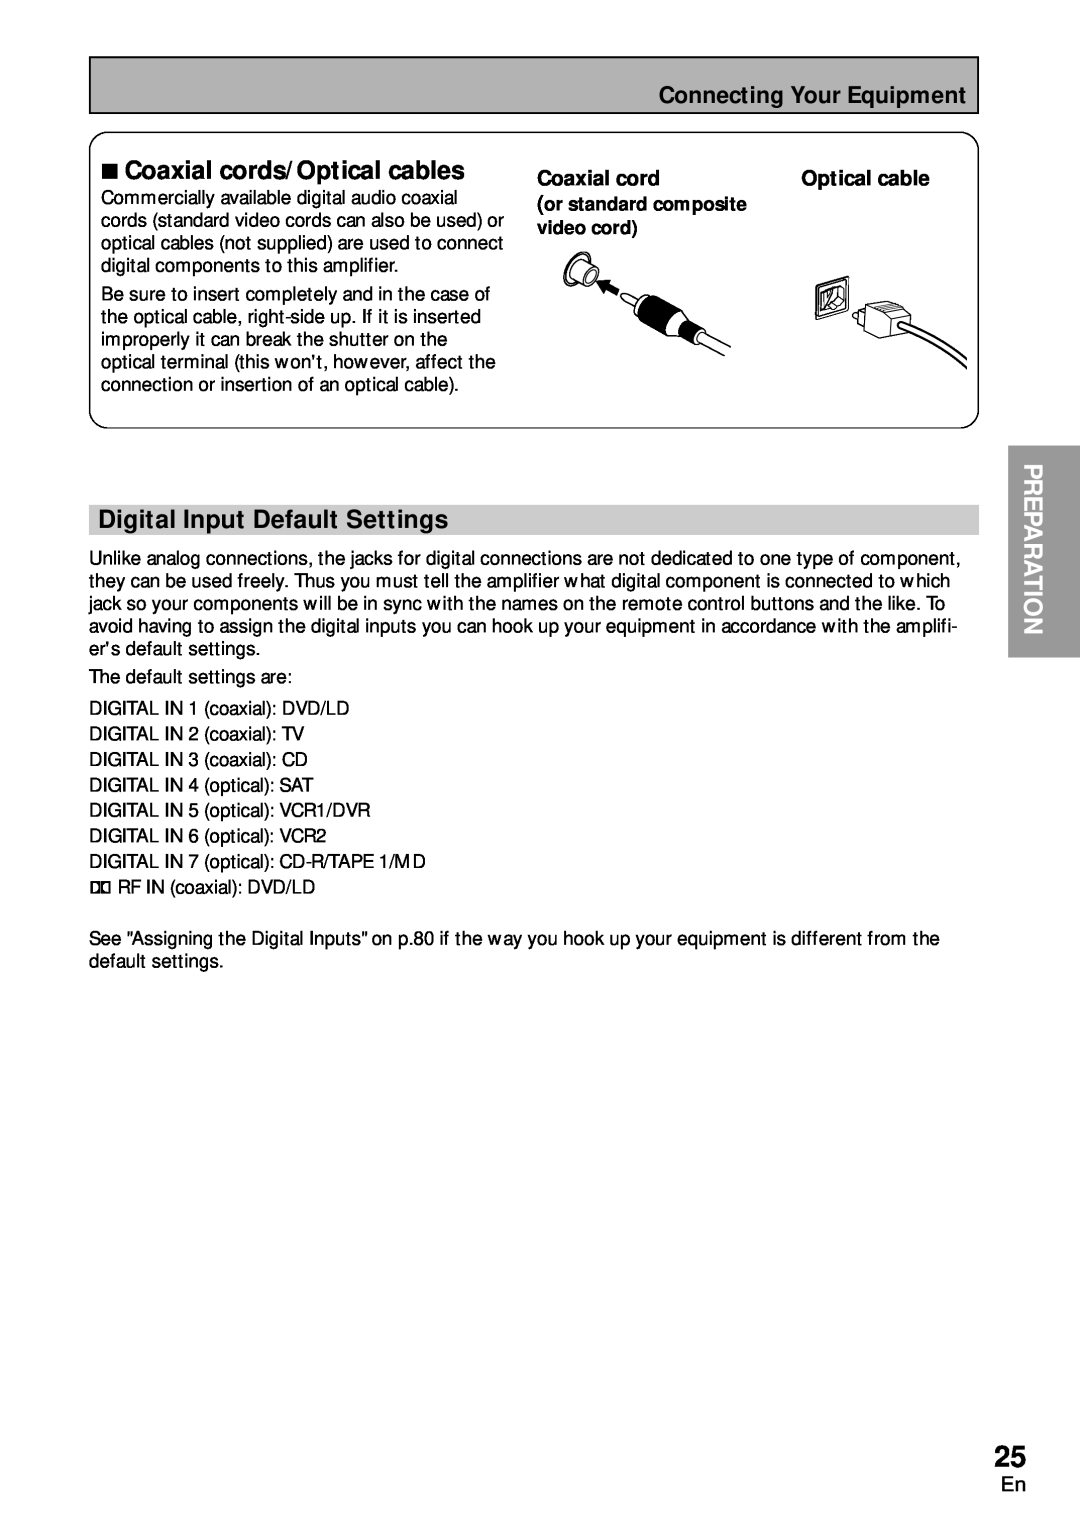 Pioneer VSA-AX10 7Coaxial cords/Optical cables, Digital Input Default Settings, Preparation, or standard composite 